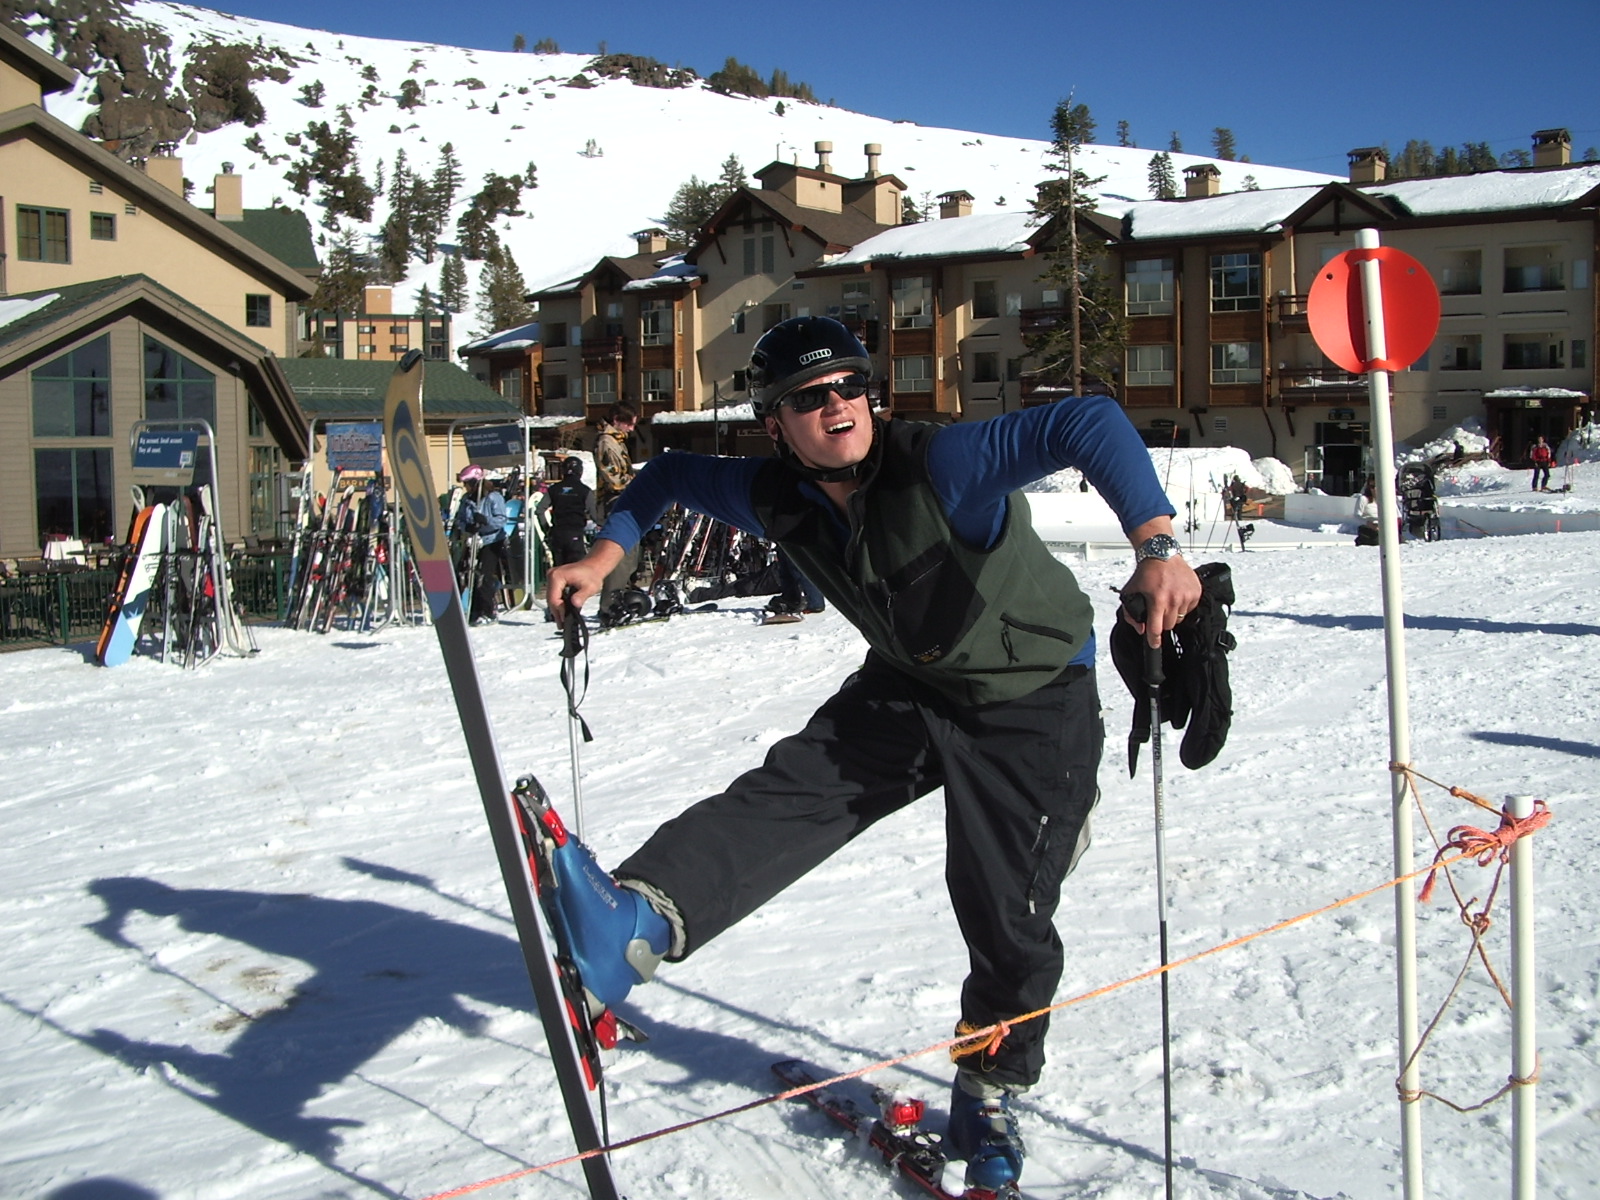 [Skiing+and+La+Jolla+Guest+House+003.jpg]